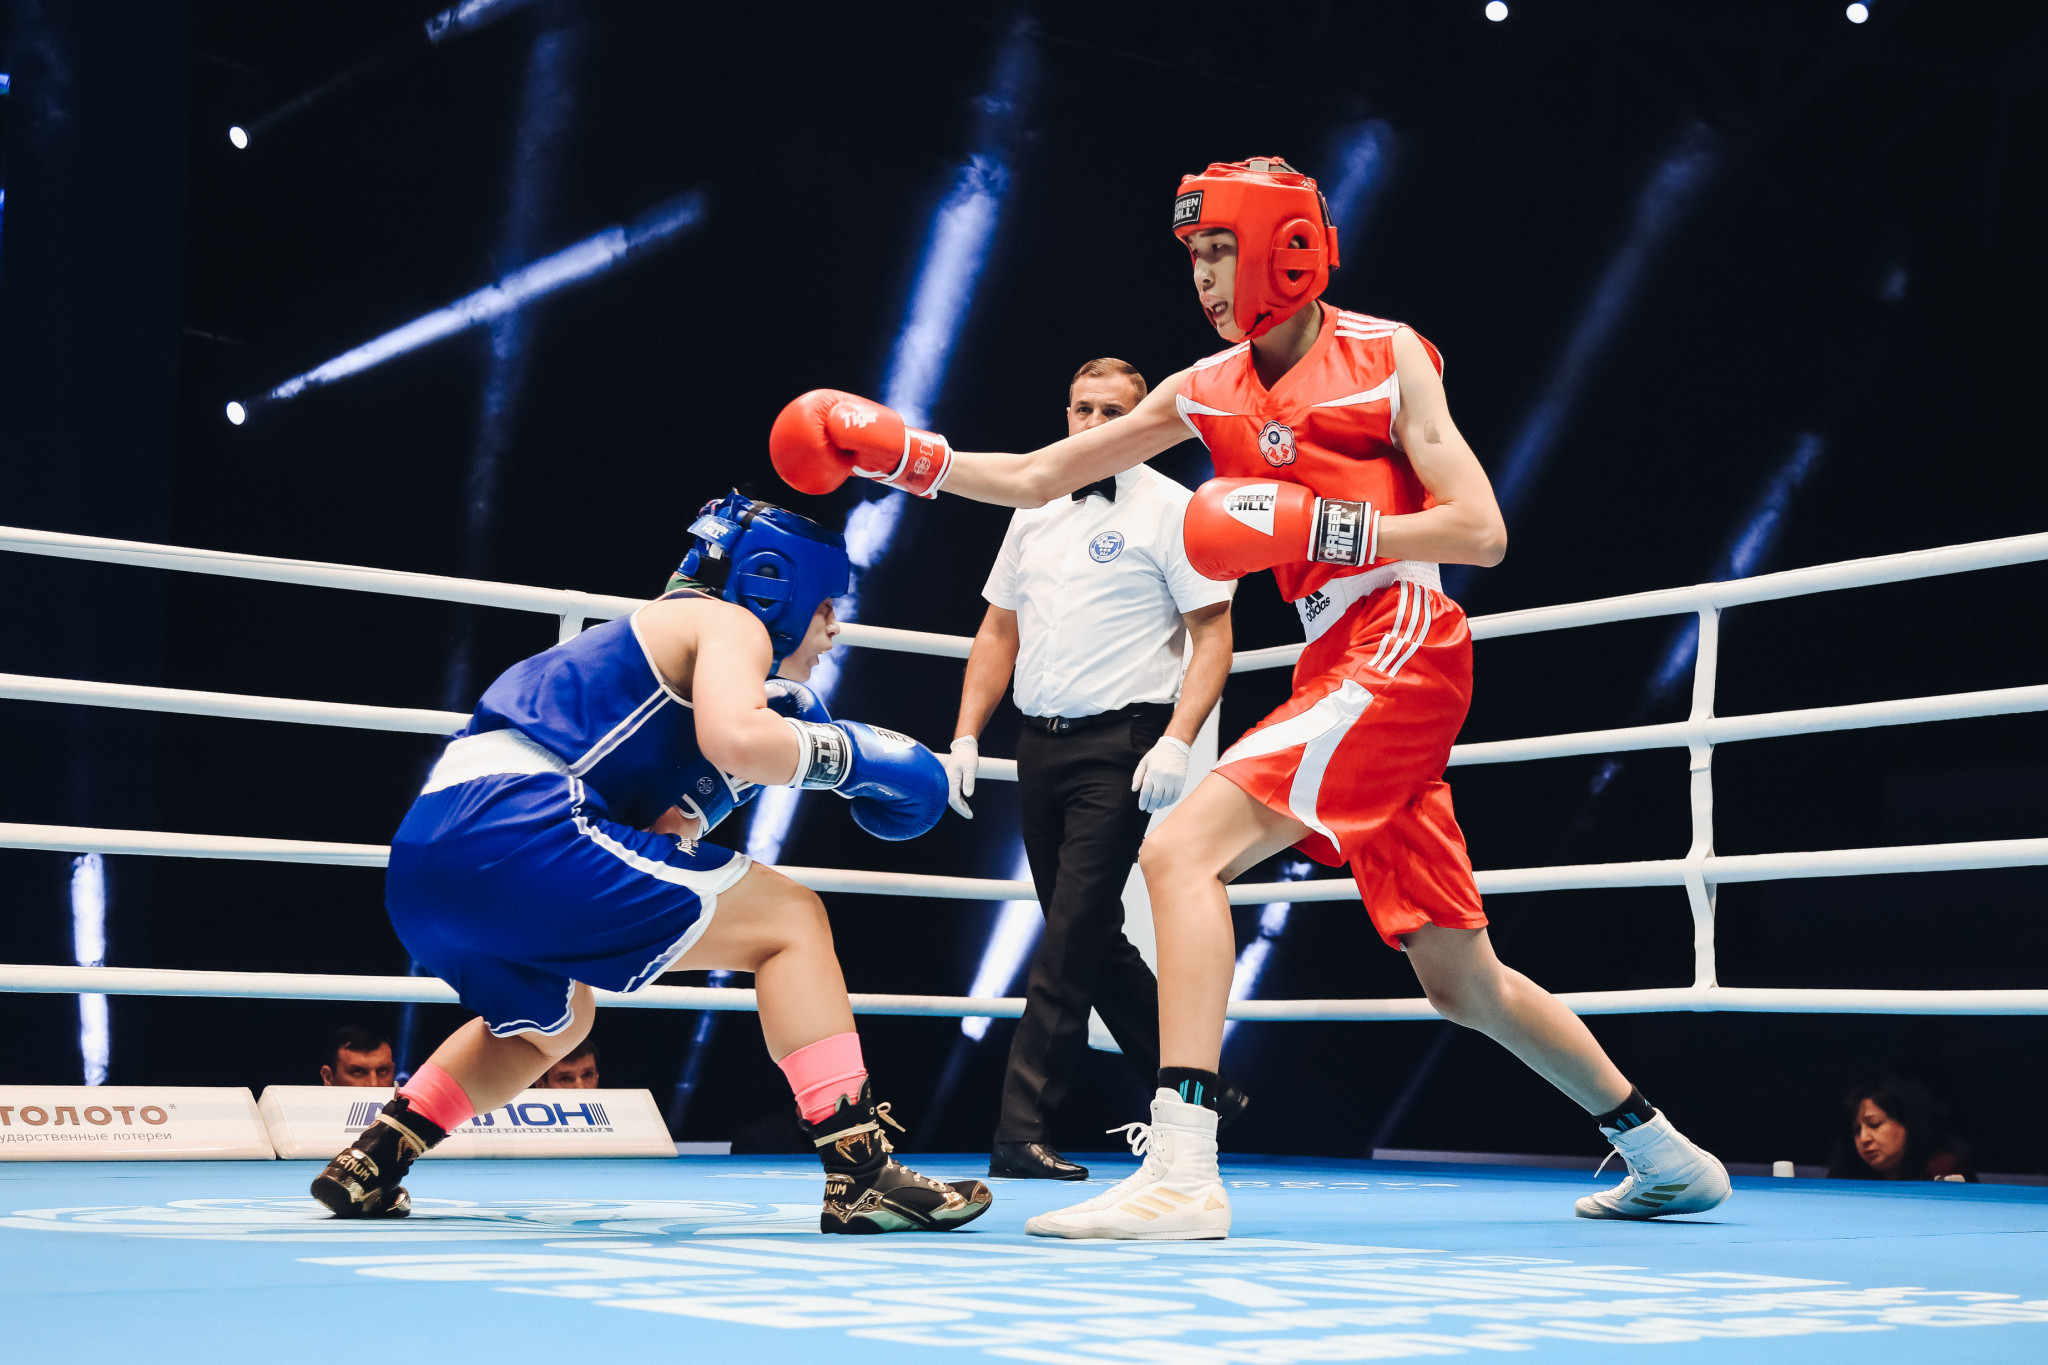 Top seeds dominate at AIBA Women's World Boxing Championships 